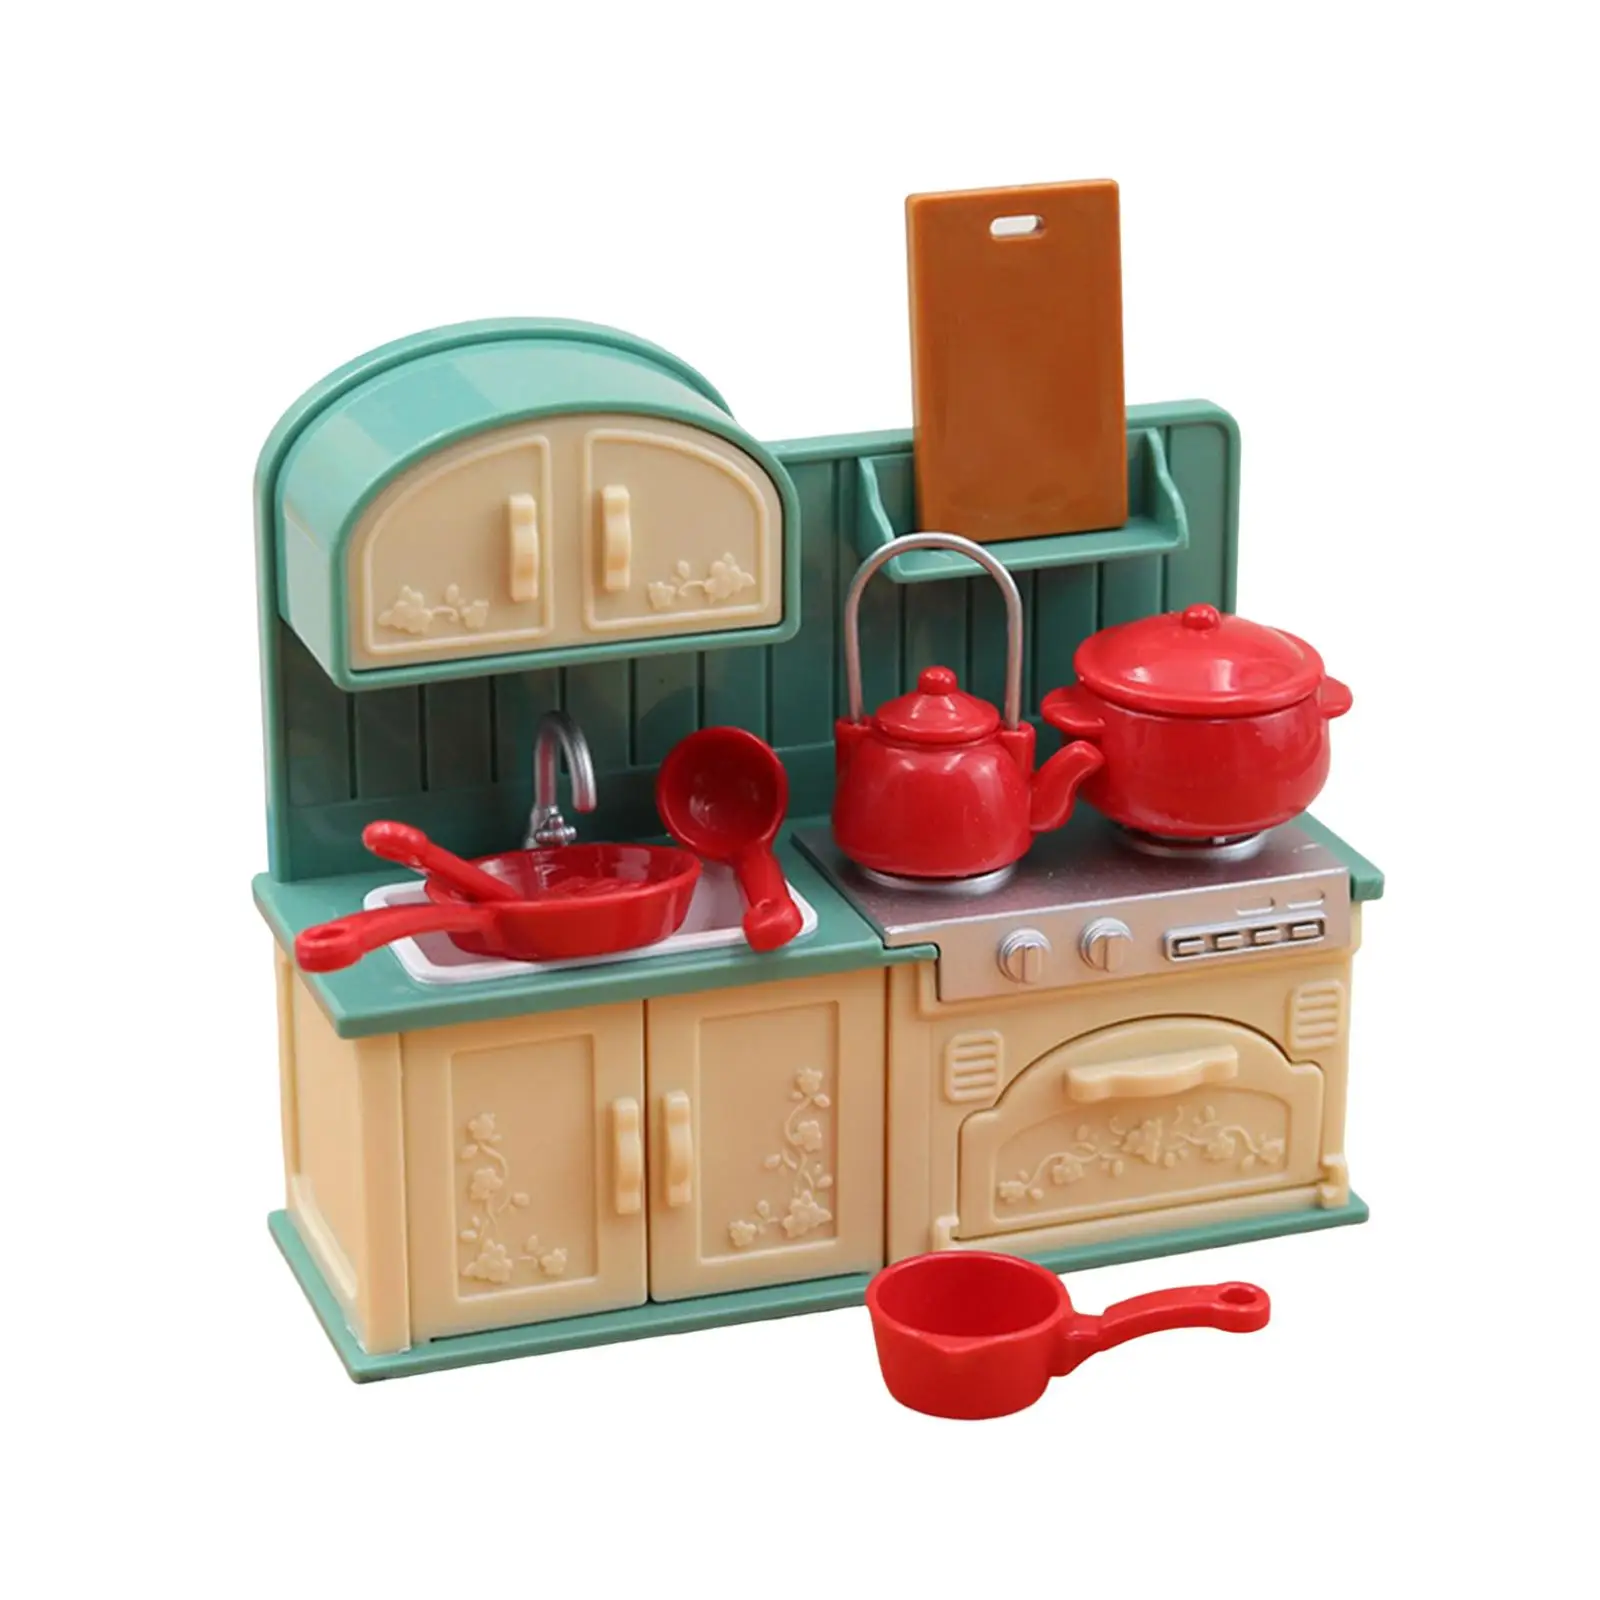 1:18 Scale Dollhouse Play Set Kitchen Accessories Miniature for Boys